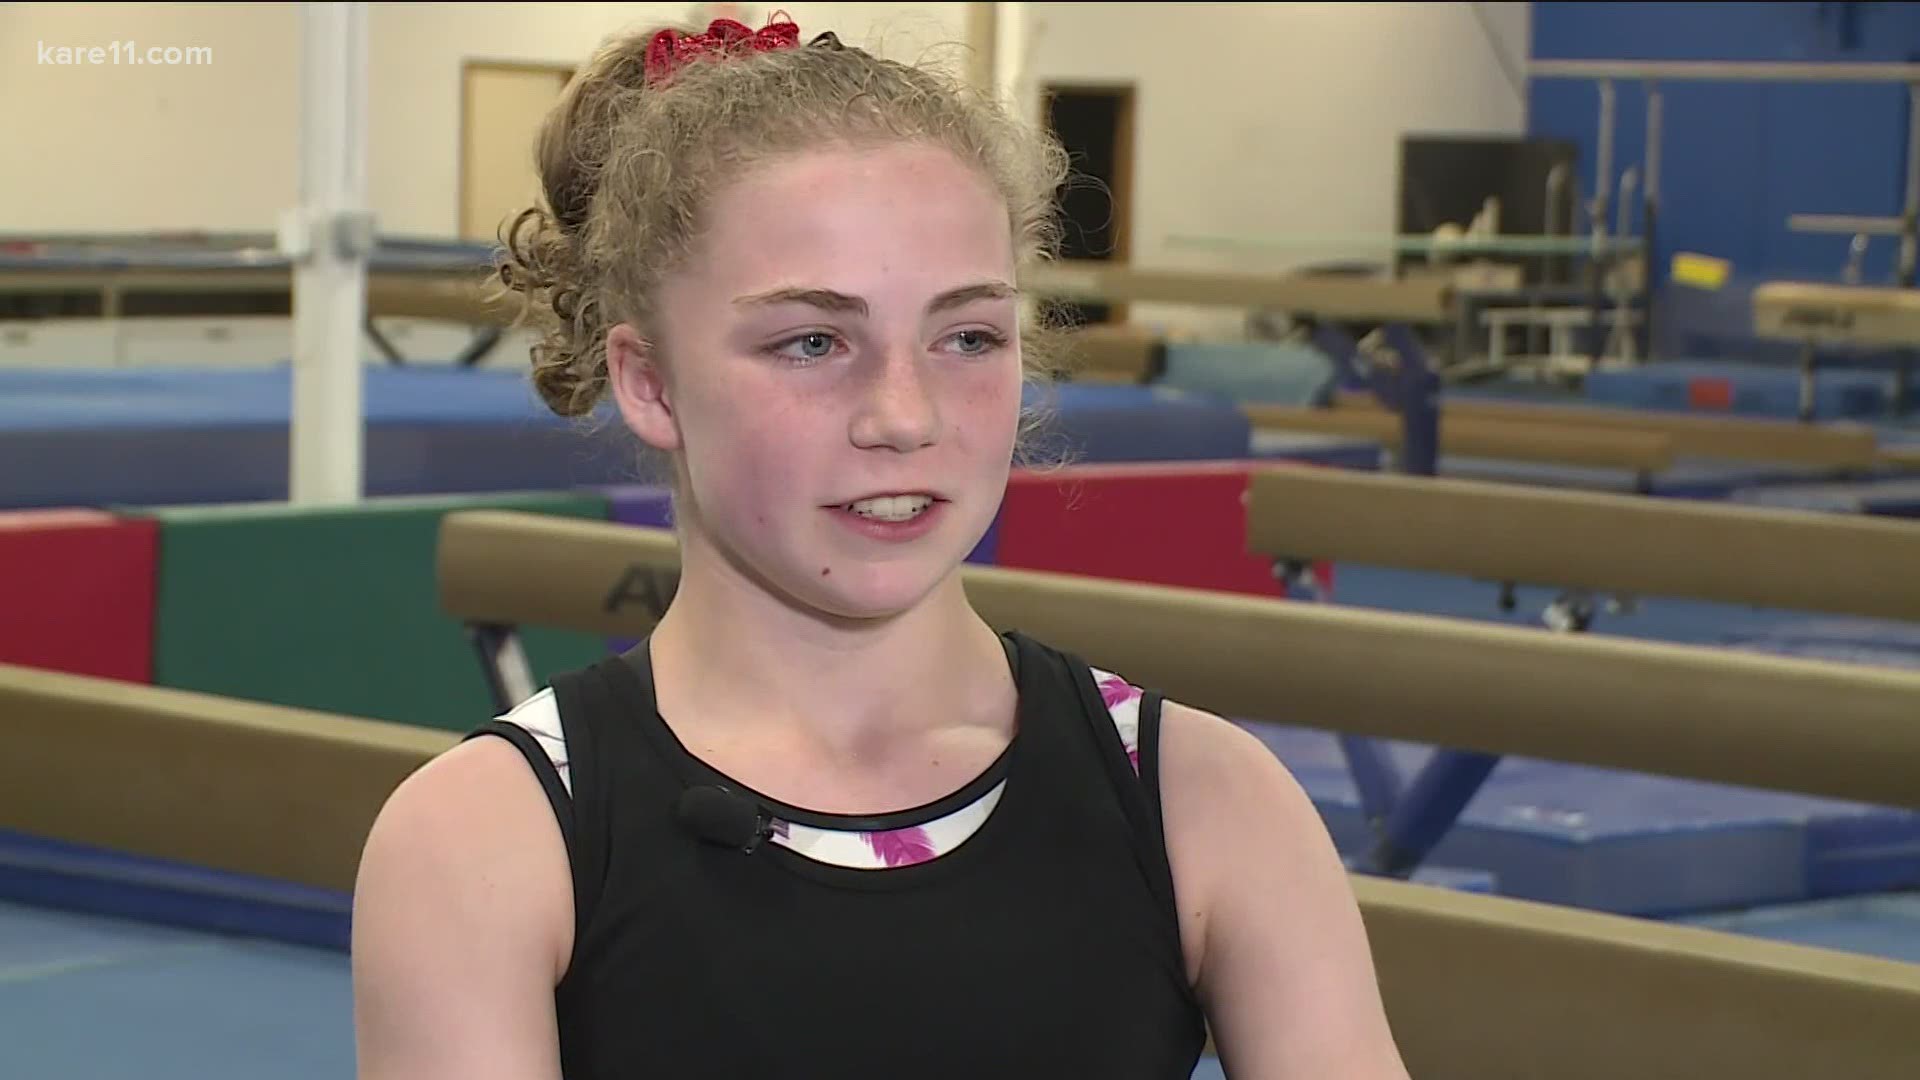 As Sunisa Lee prepares for Tokyo, her former coach gives inside look inside Midwest Gymnastics Center, where it all began.